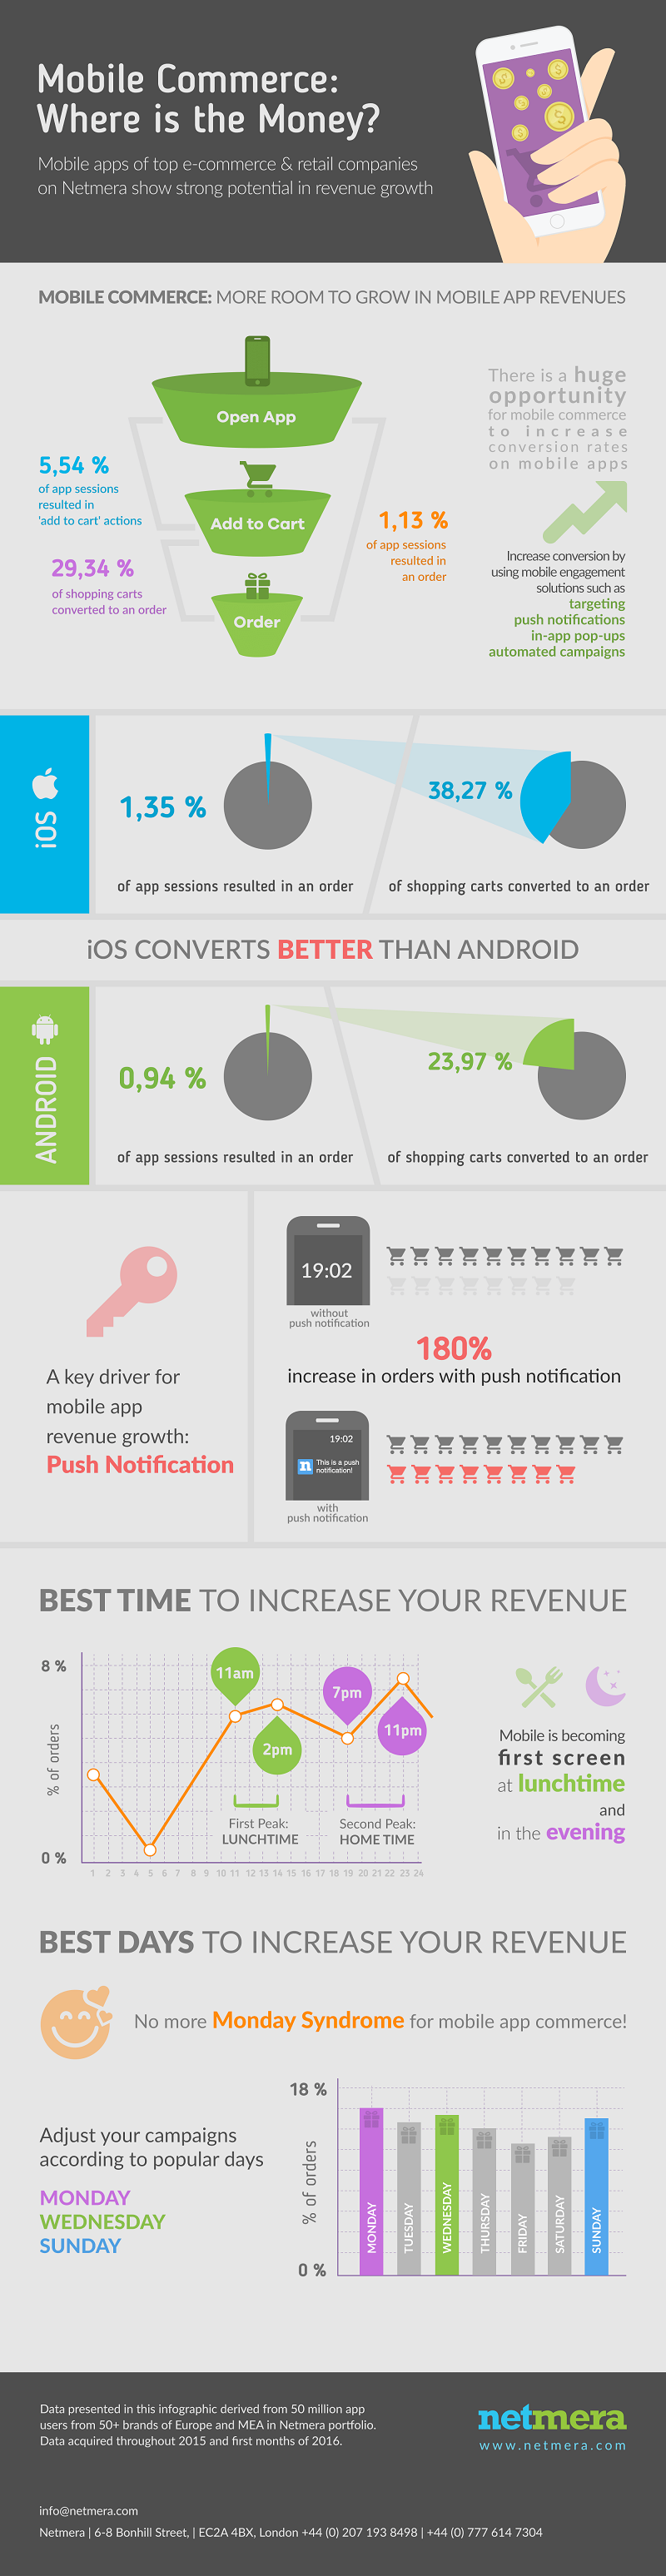 Mobile-Marketing-Infographic-(1).png